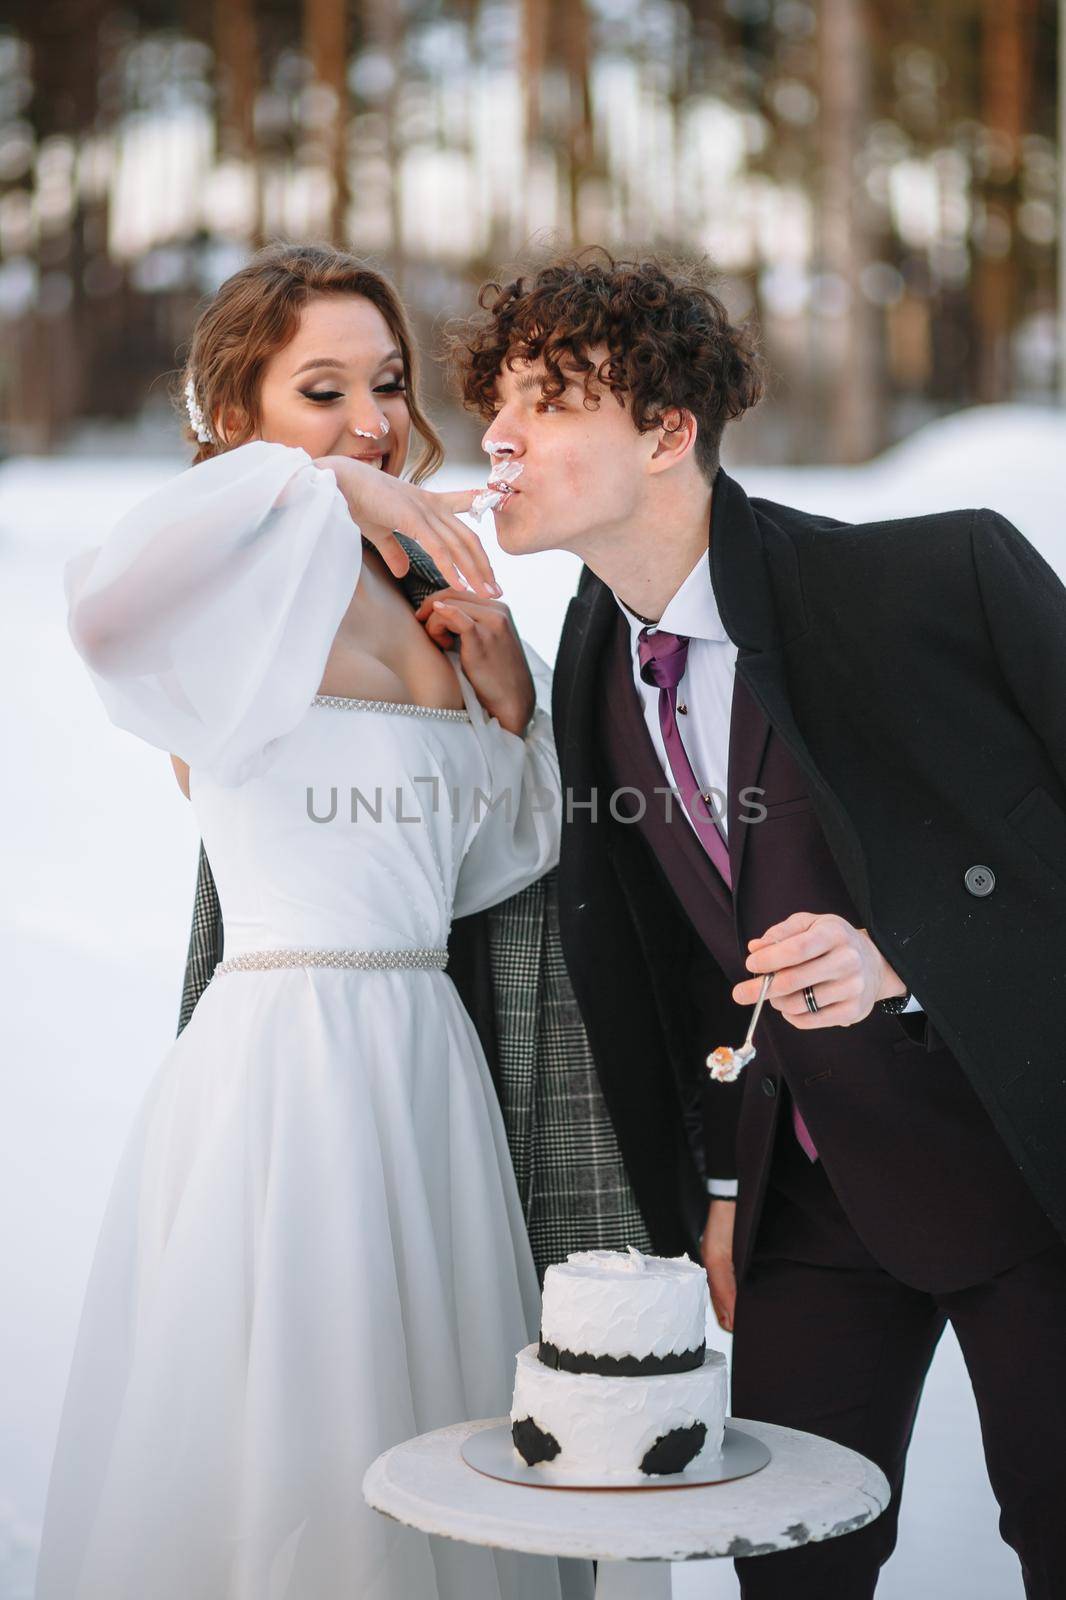 The groom licks the remains of the wedding cake from the bride's finger. Shooting in the winter forest by deandy